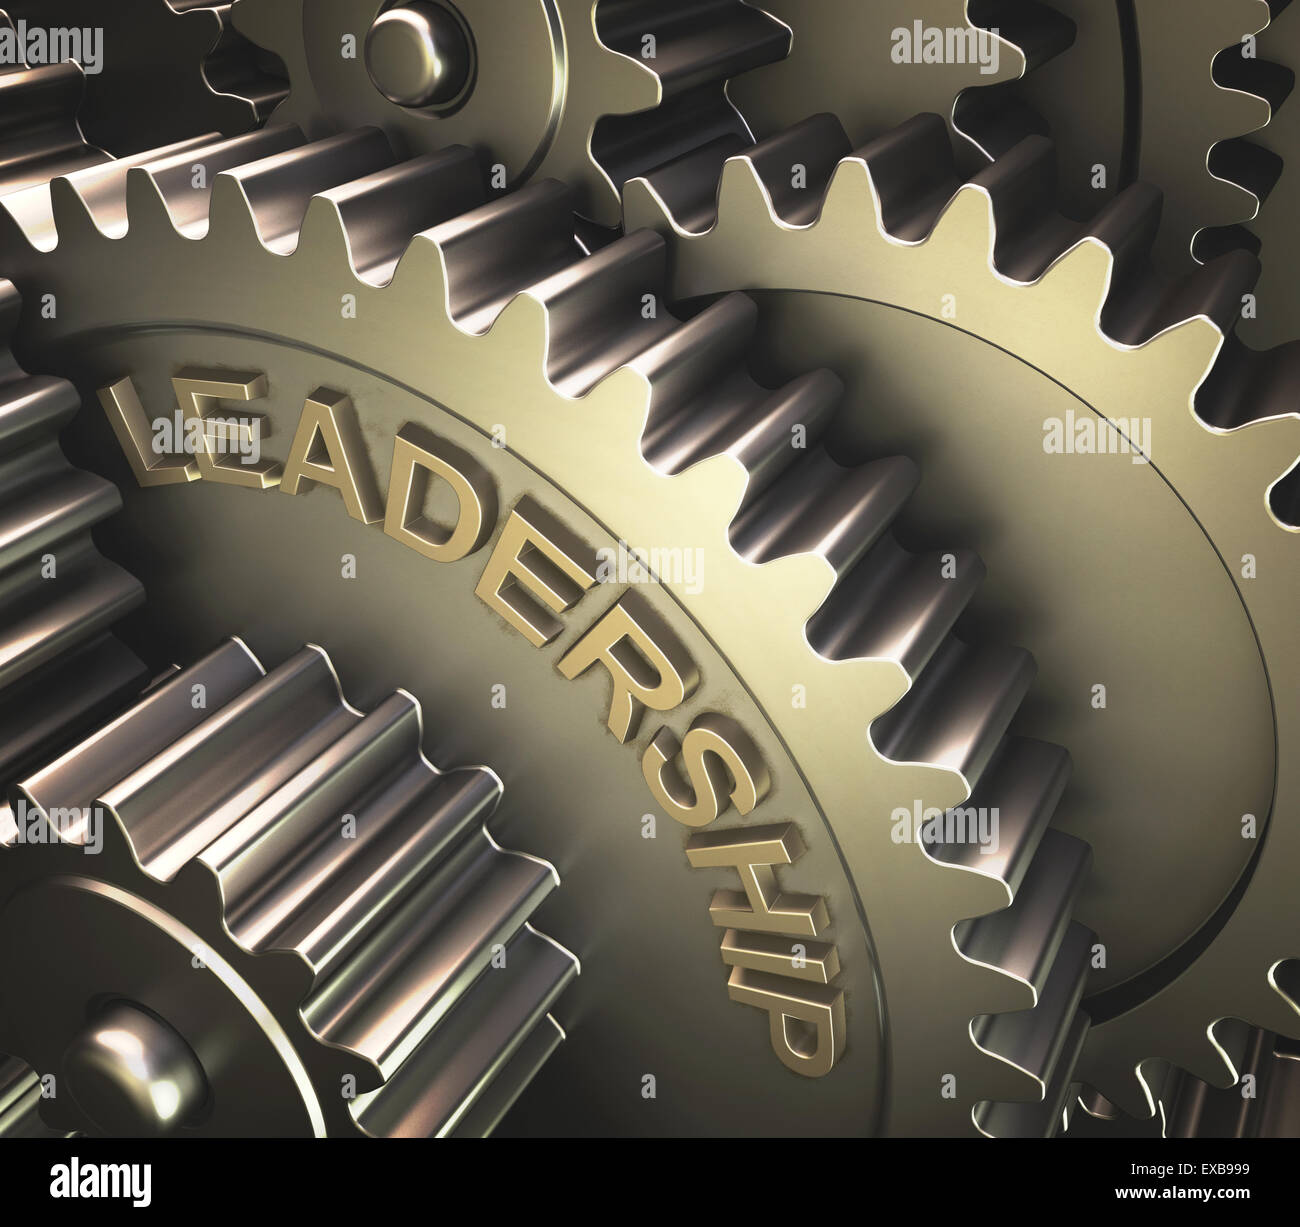 Set of gears with the word leadership printed on the side. Stock Photo